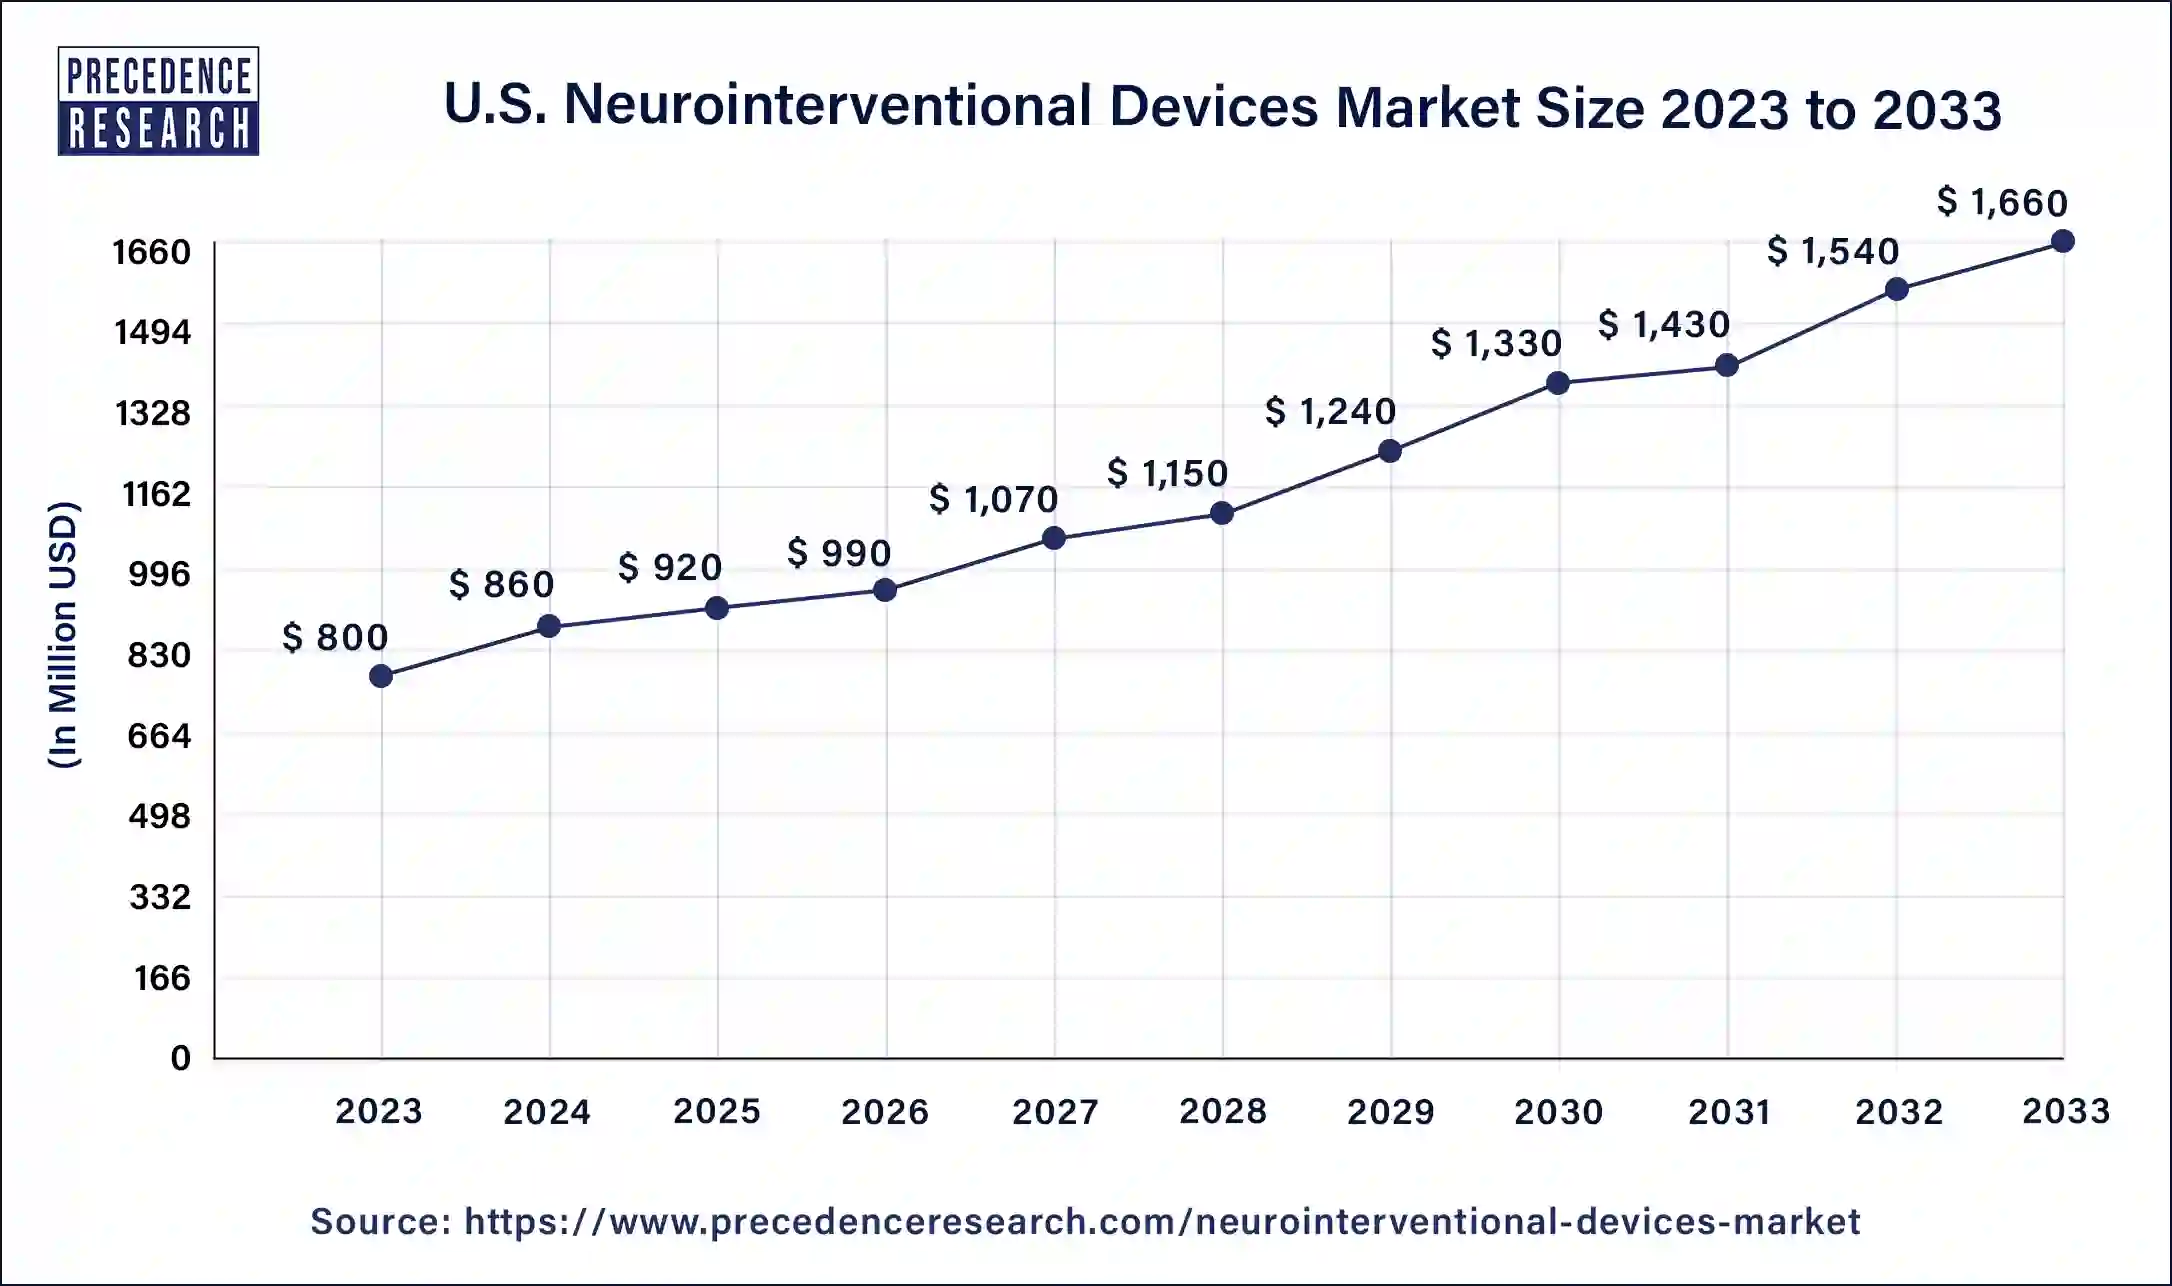 U.S. Neurointerventional Devices Market Size 2024 to 2033